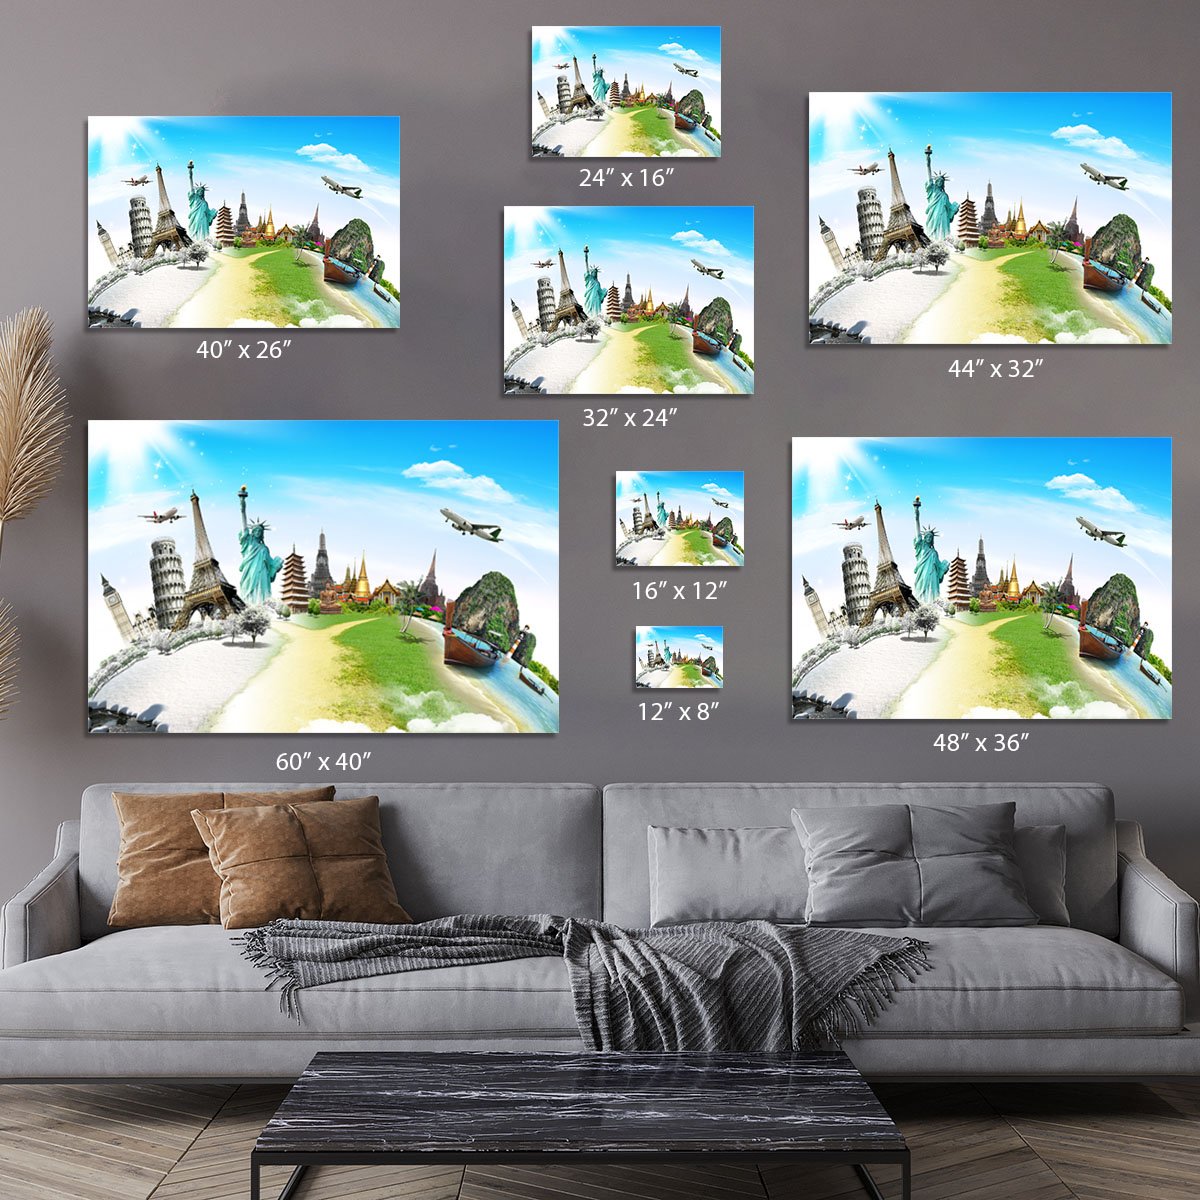 Travel the world monument Canvas Print or Poster